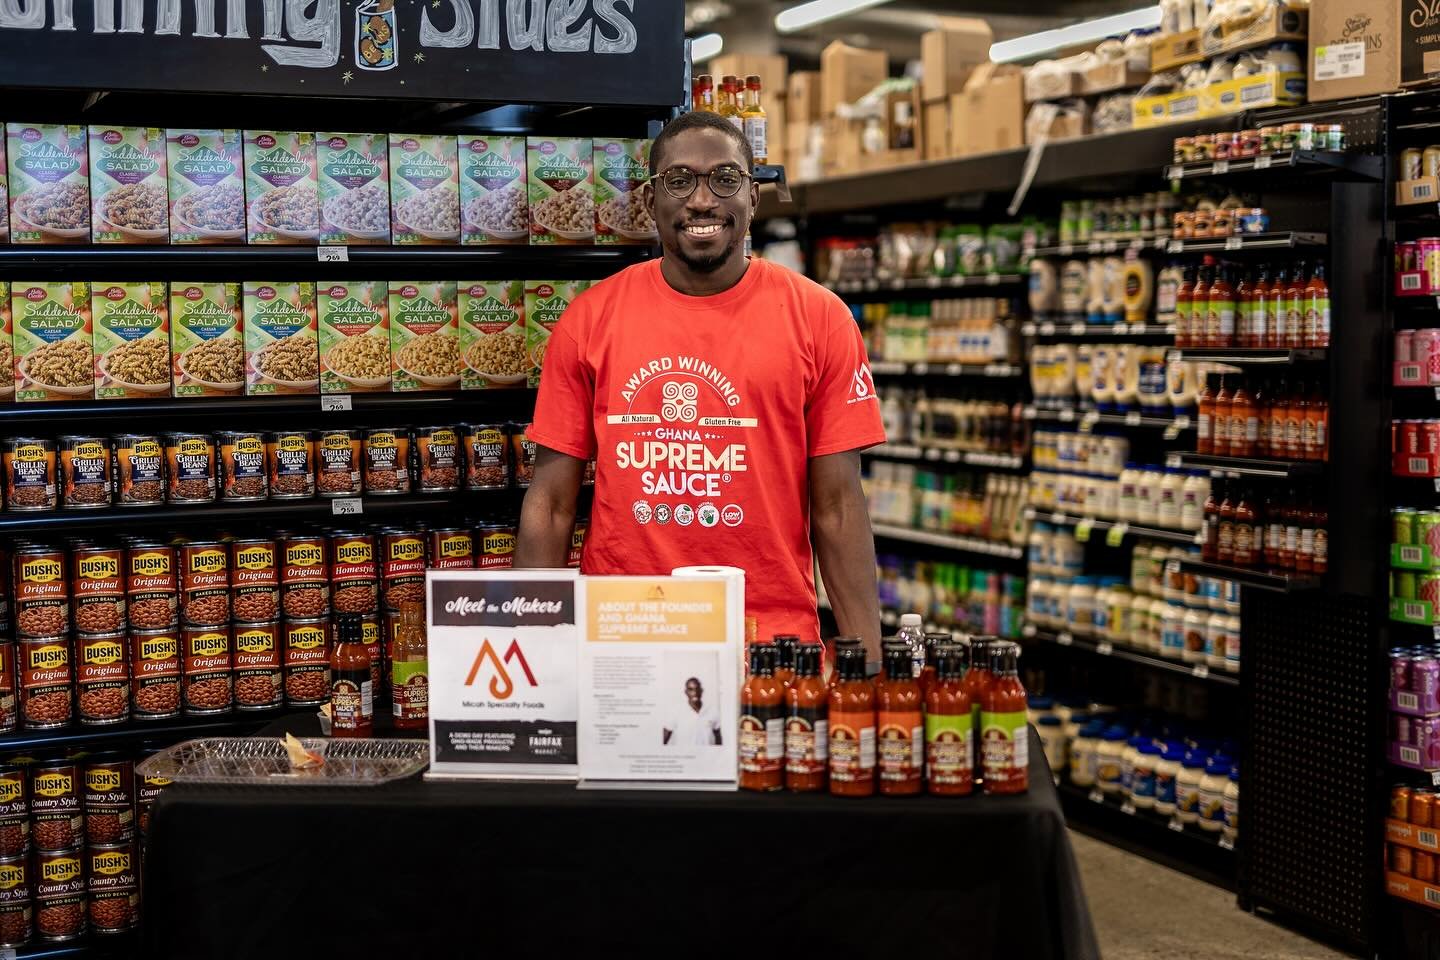 Earlier this month at Meet The Maker in @fairfaxmkt . This was one of our most successful demos year-to-date. We love to interact with our customers to answer questions and to spread the word about the &ldquo;secret sauce&rdquo; 😃 

Stop by to shop 